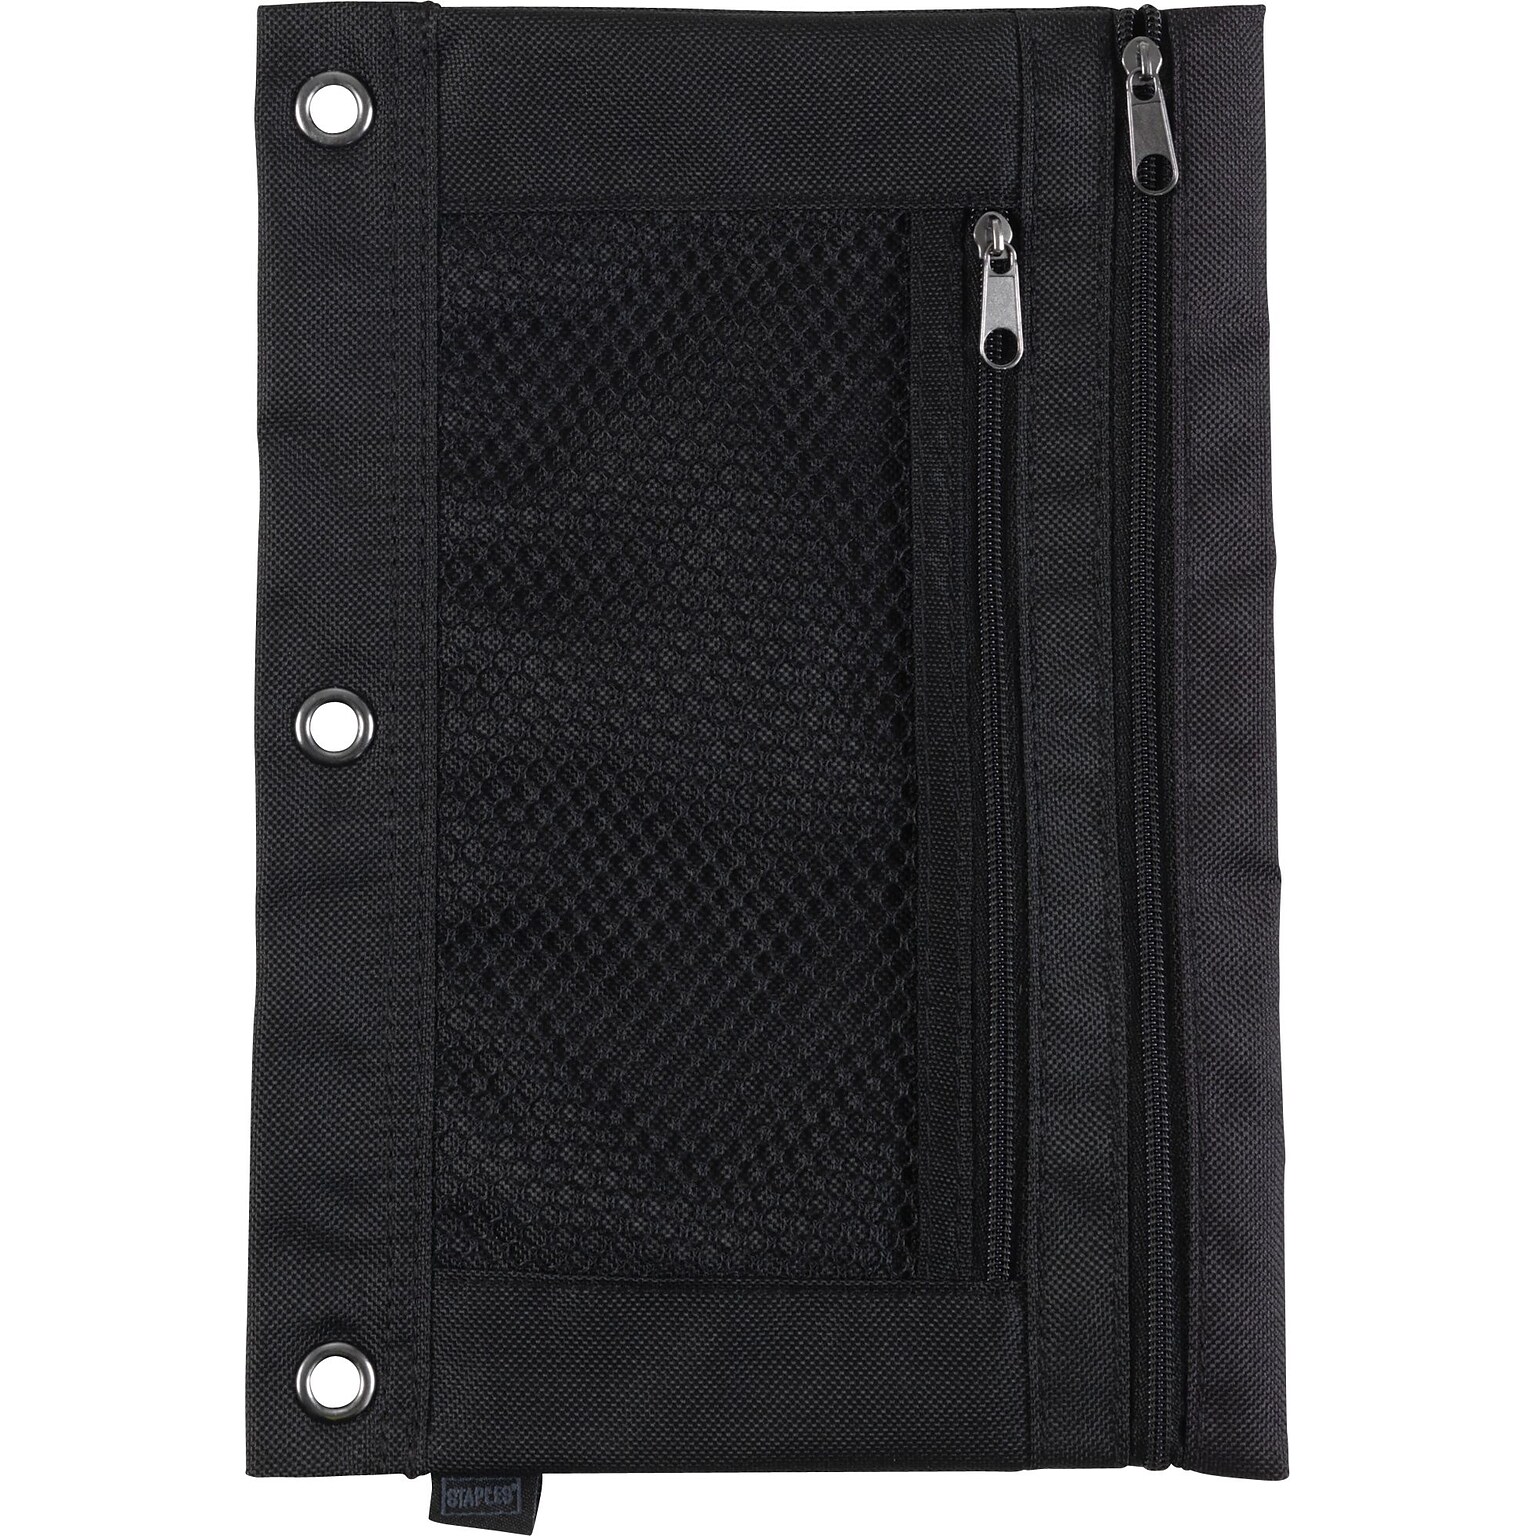 Staples® 3-Ring Pencil Pouch, Black